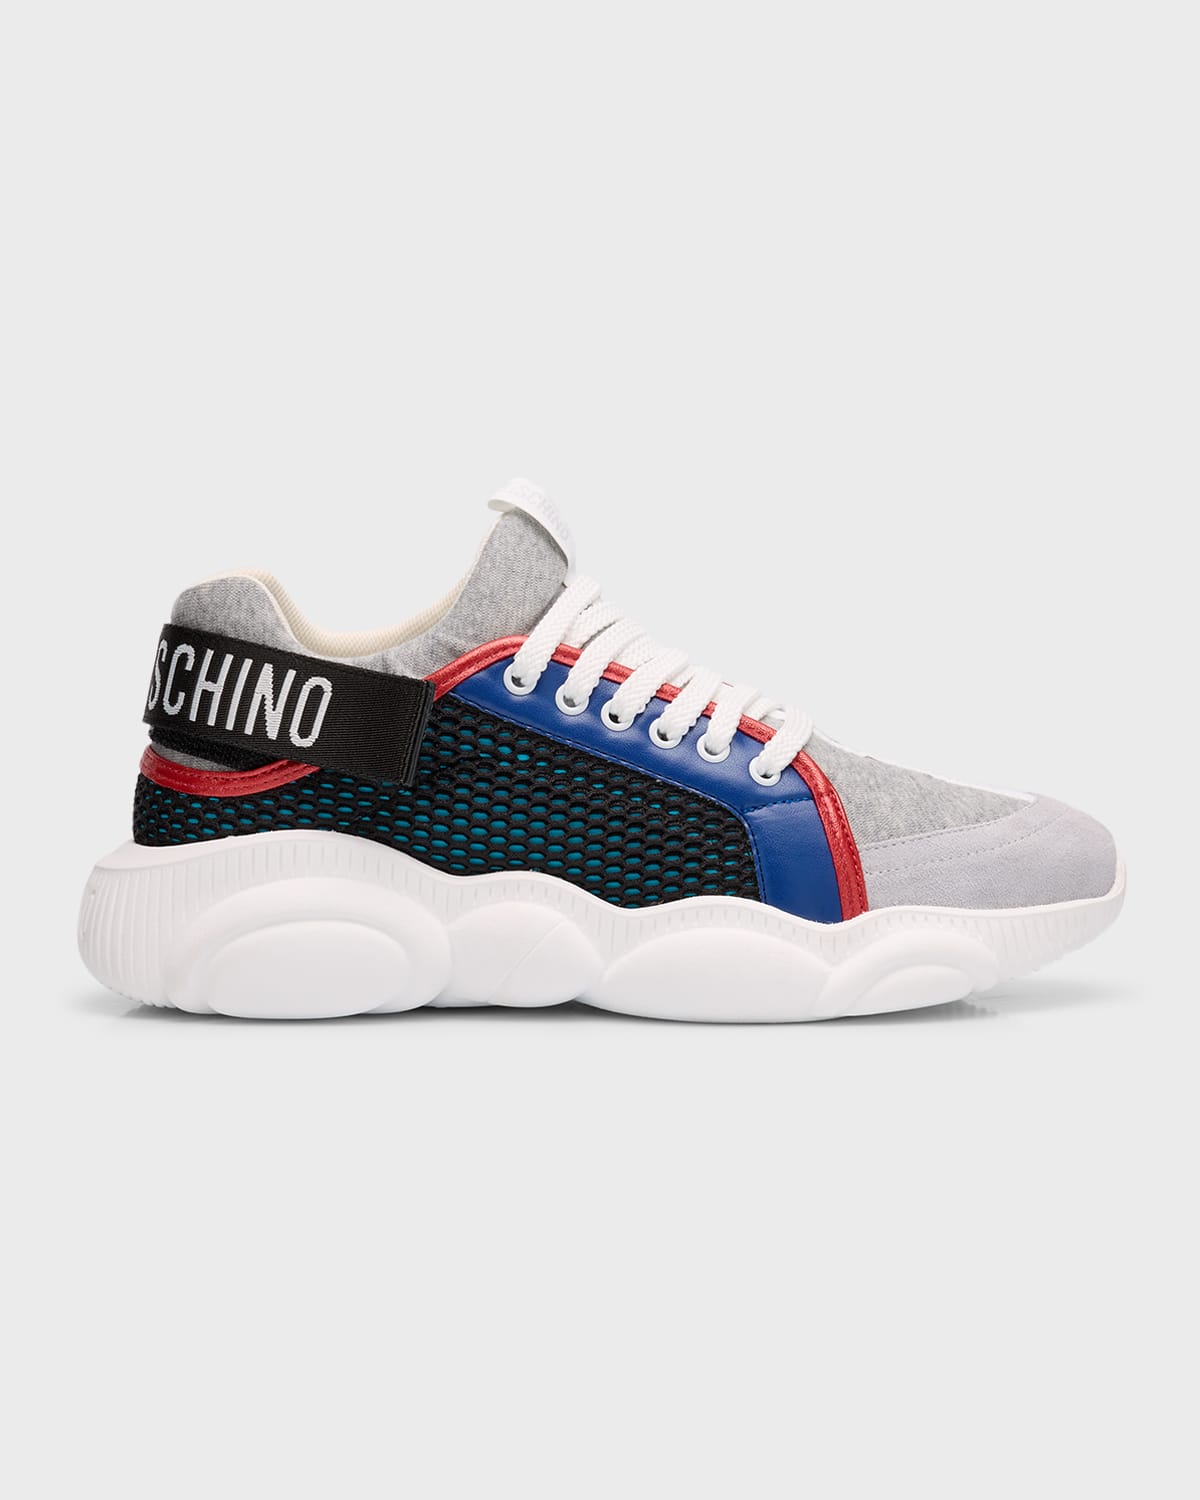 Moschino Men's Teddy Fashion Trainers With Strap In Blue Multi